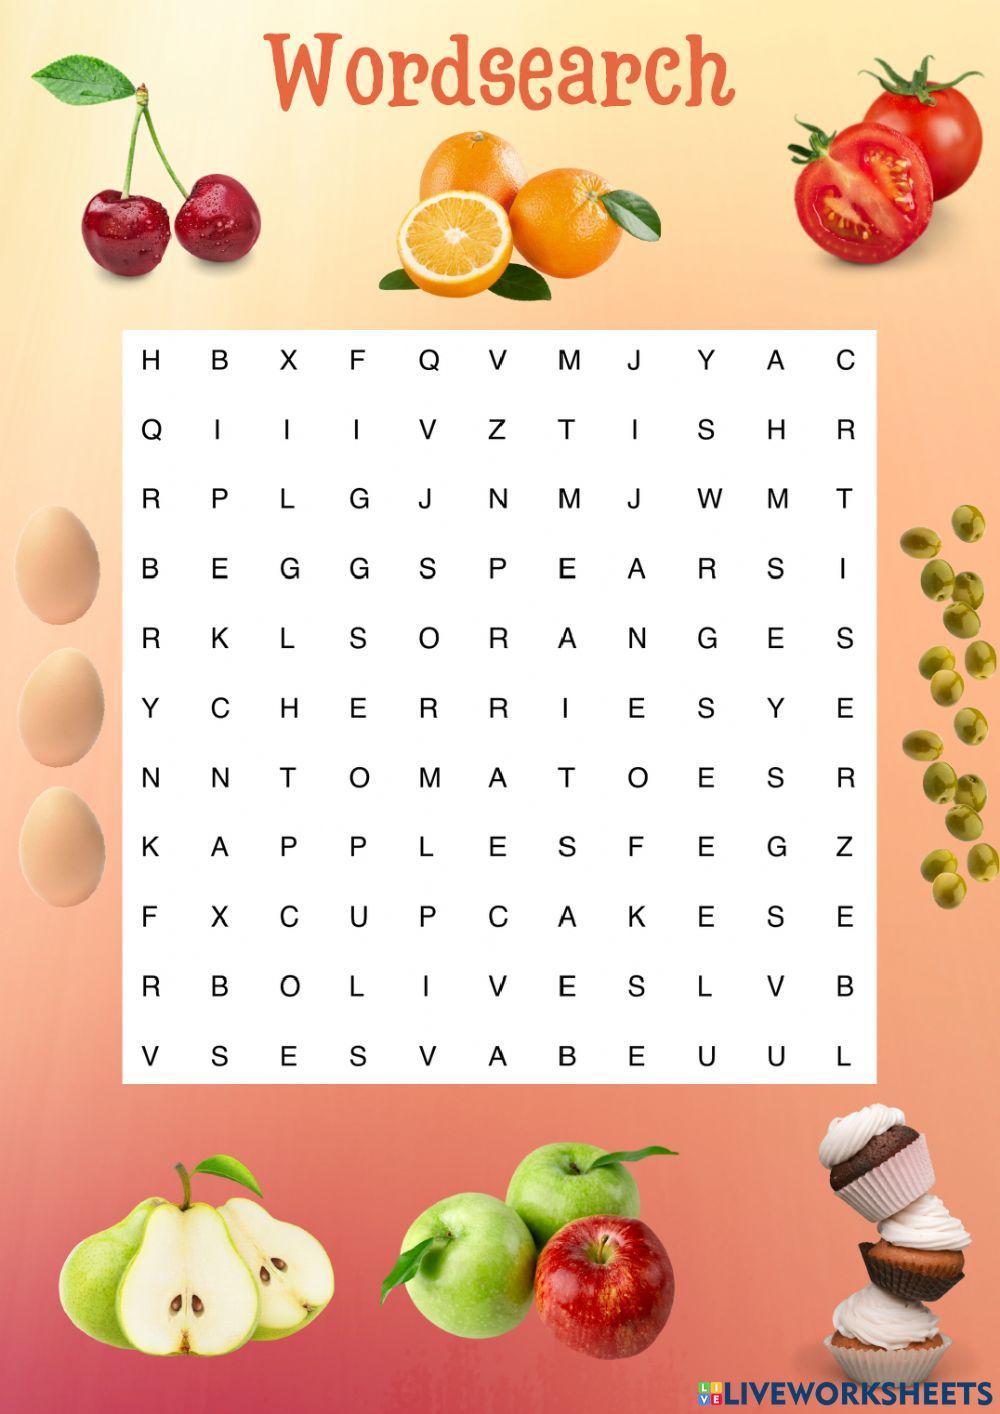 Food wordsearch At the picnic